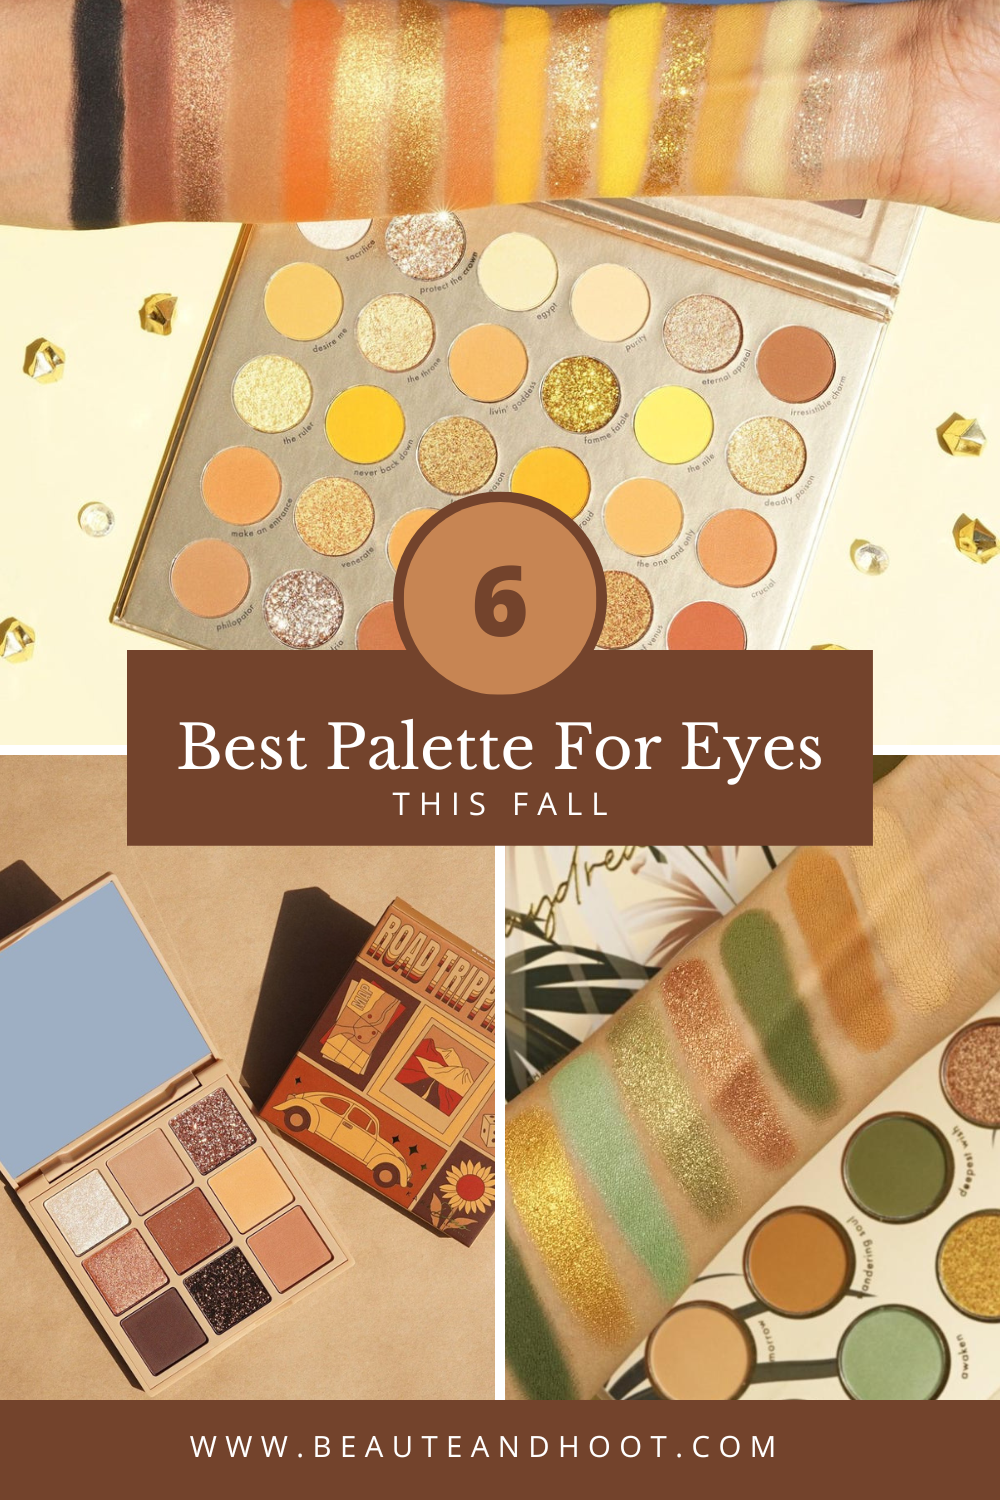 6 Best Palettes For Eyes This Fall